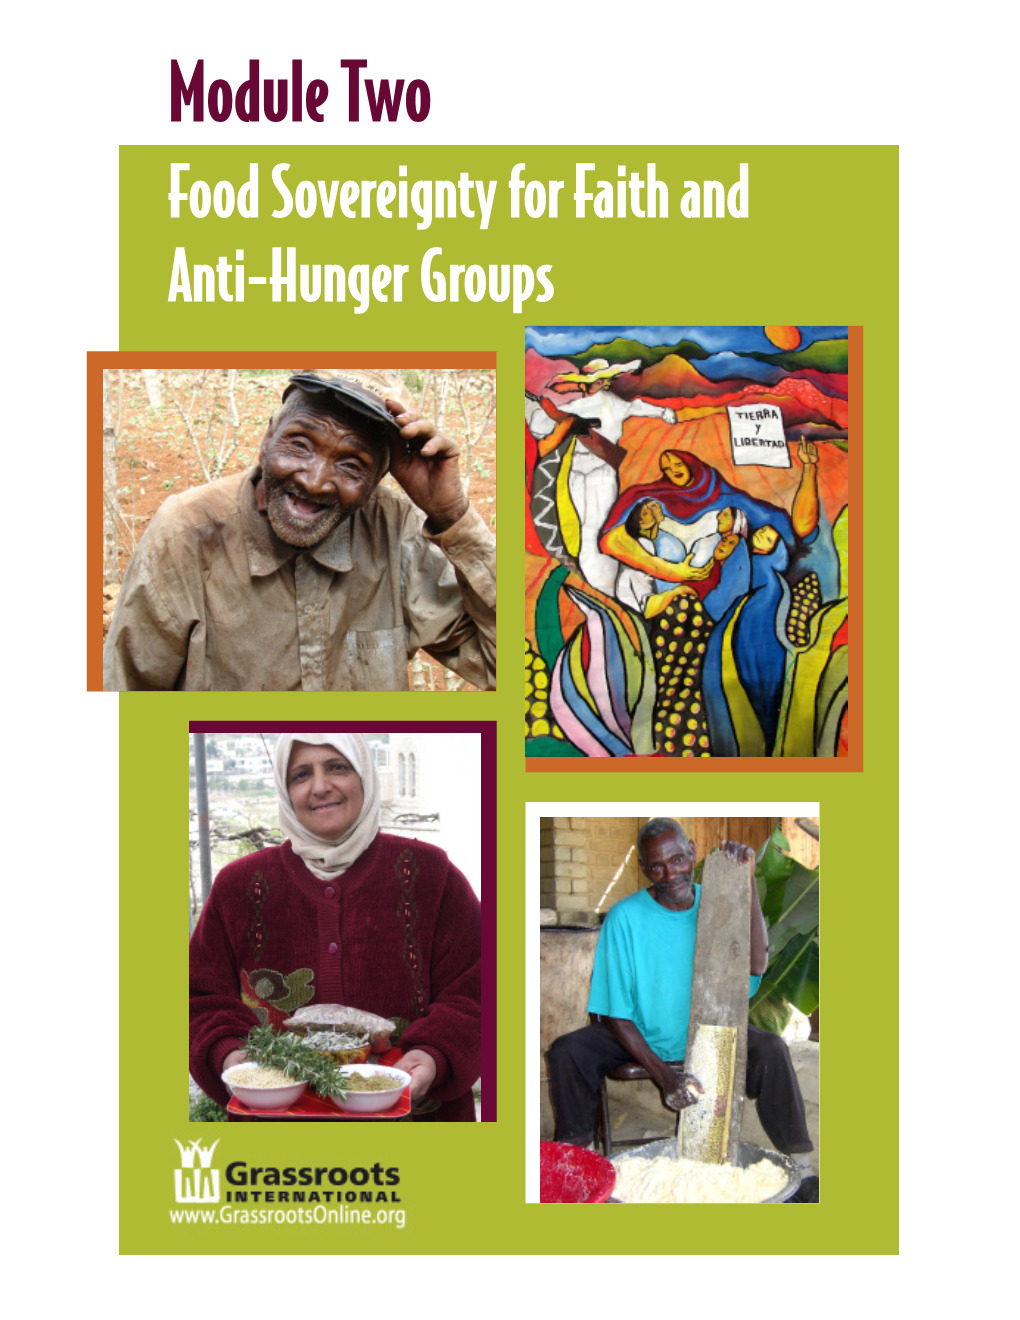 Module 2: Food Sovereignty for Faith and Anti-Hunger Groups